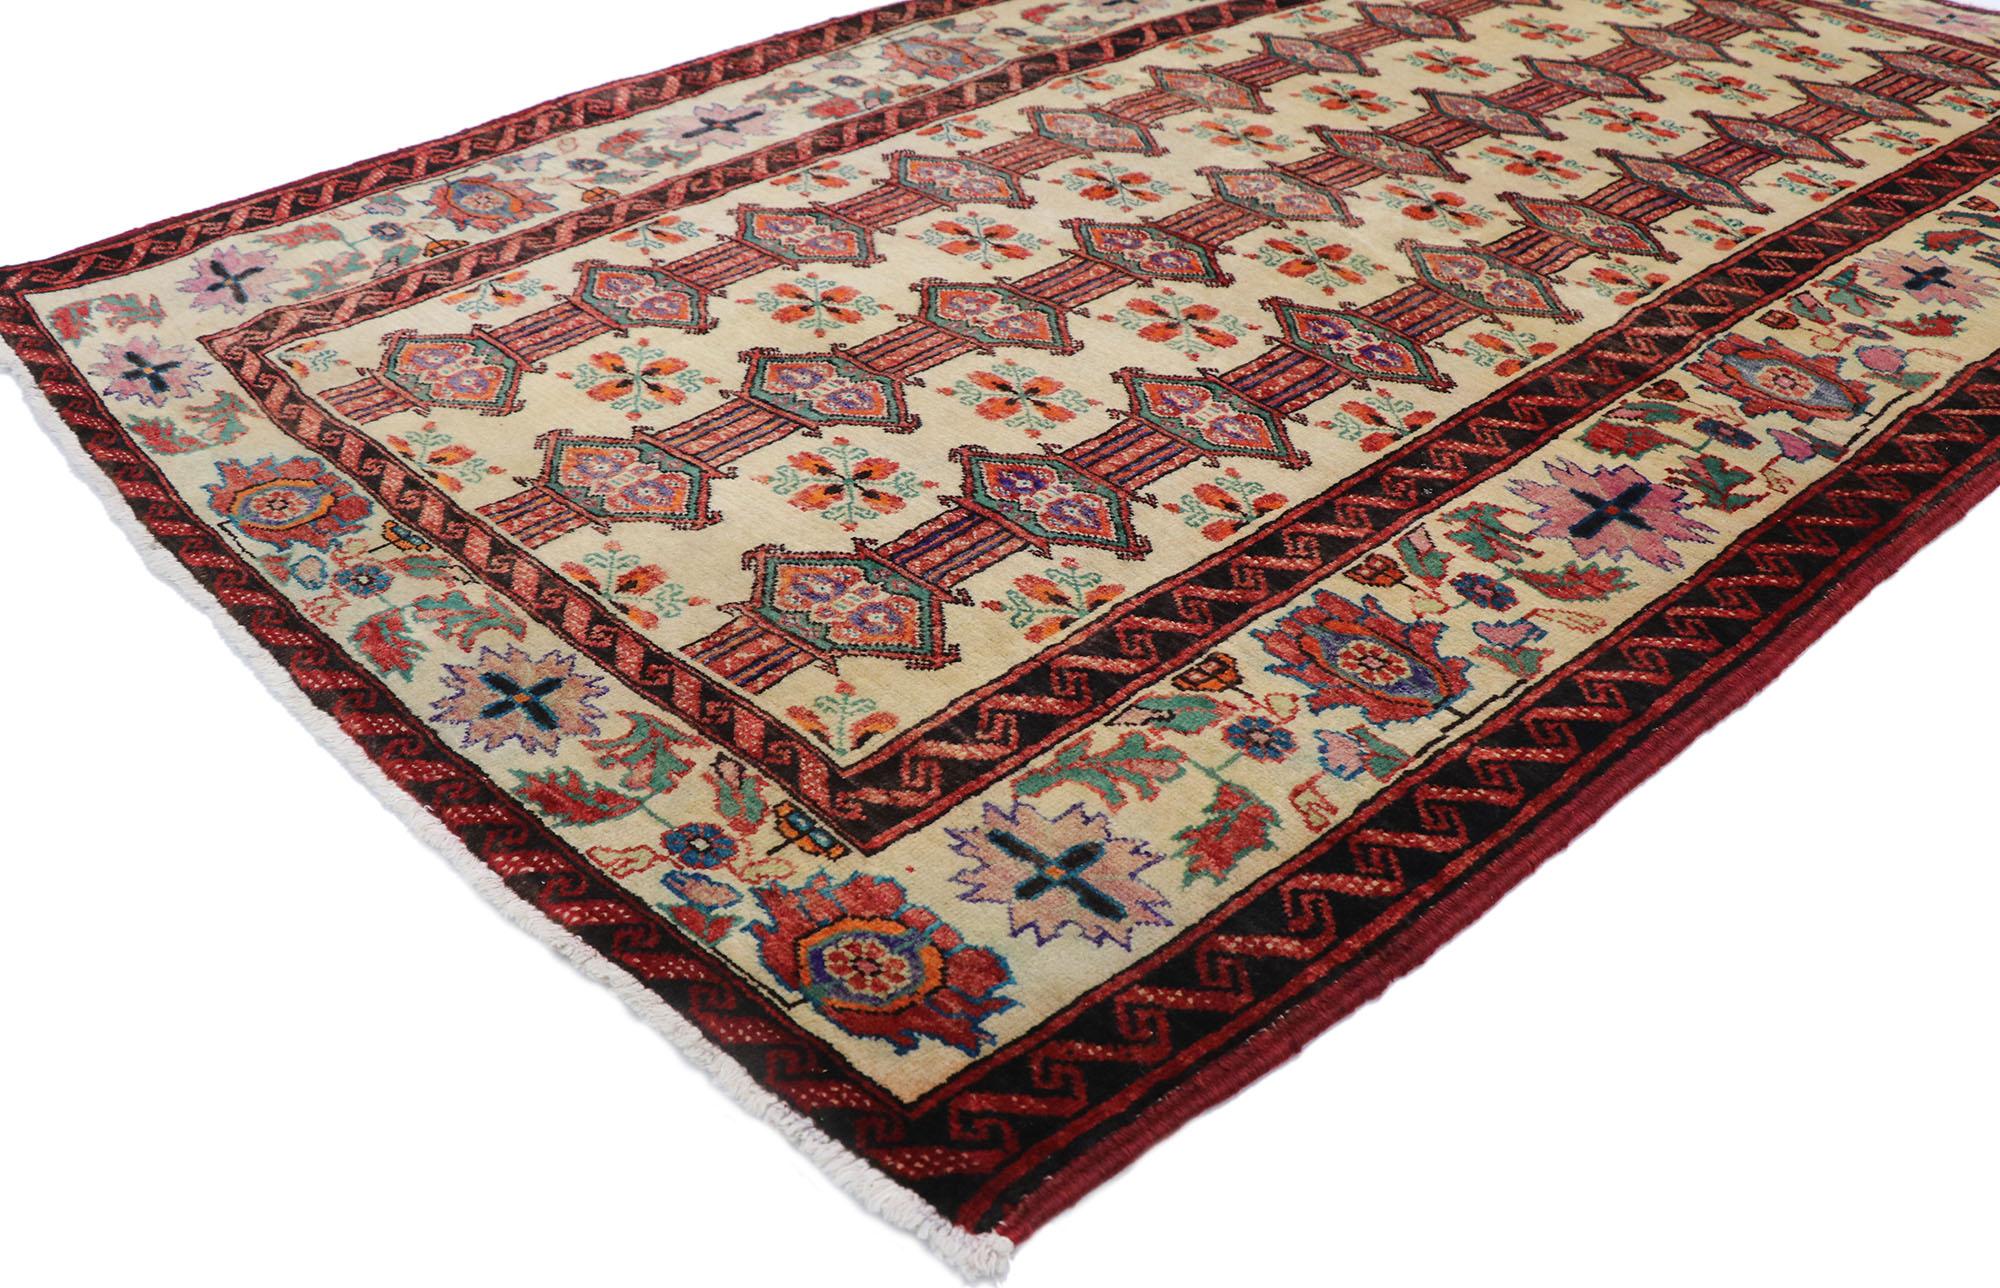 77717 Vintage Persian Turkaman rug with Tribal Style 03'08 x 05'08. Full of tiny details and a bold expressive design combined with lively colors and tribal style, this hand-knotted wool vintage Persian Turkaman rug is a captivating vision of woven